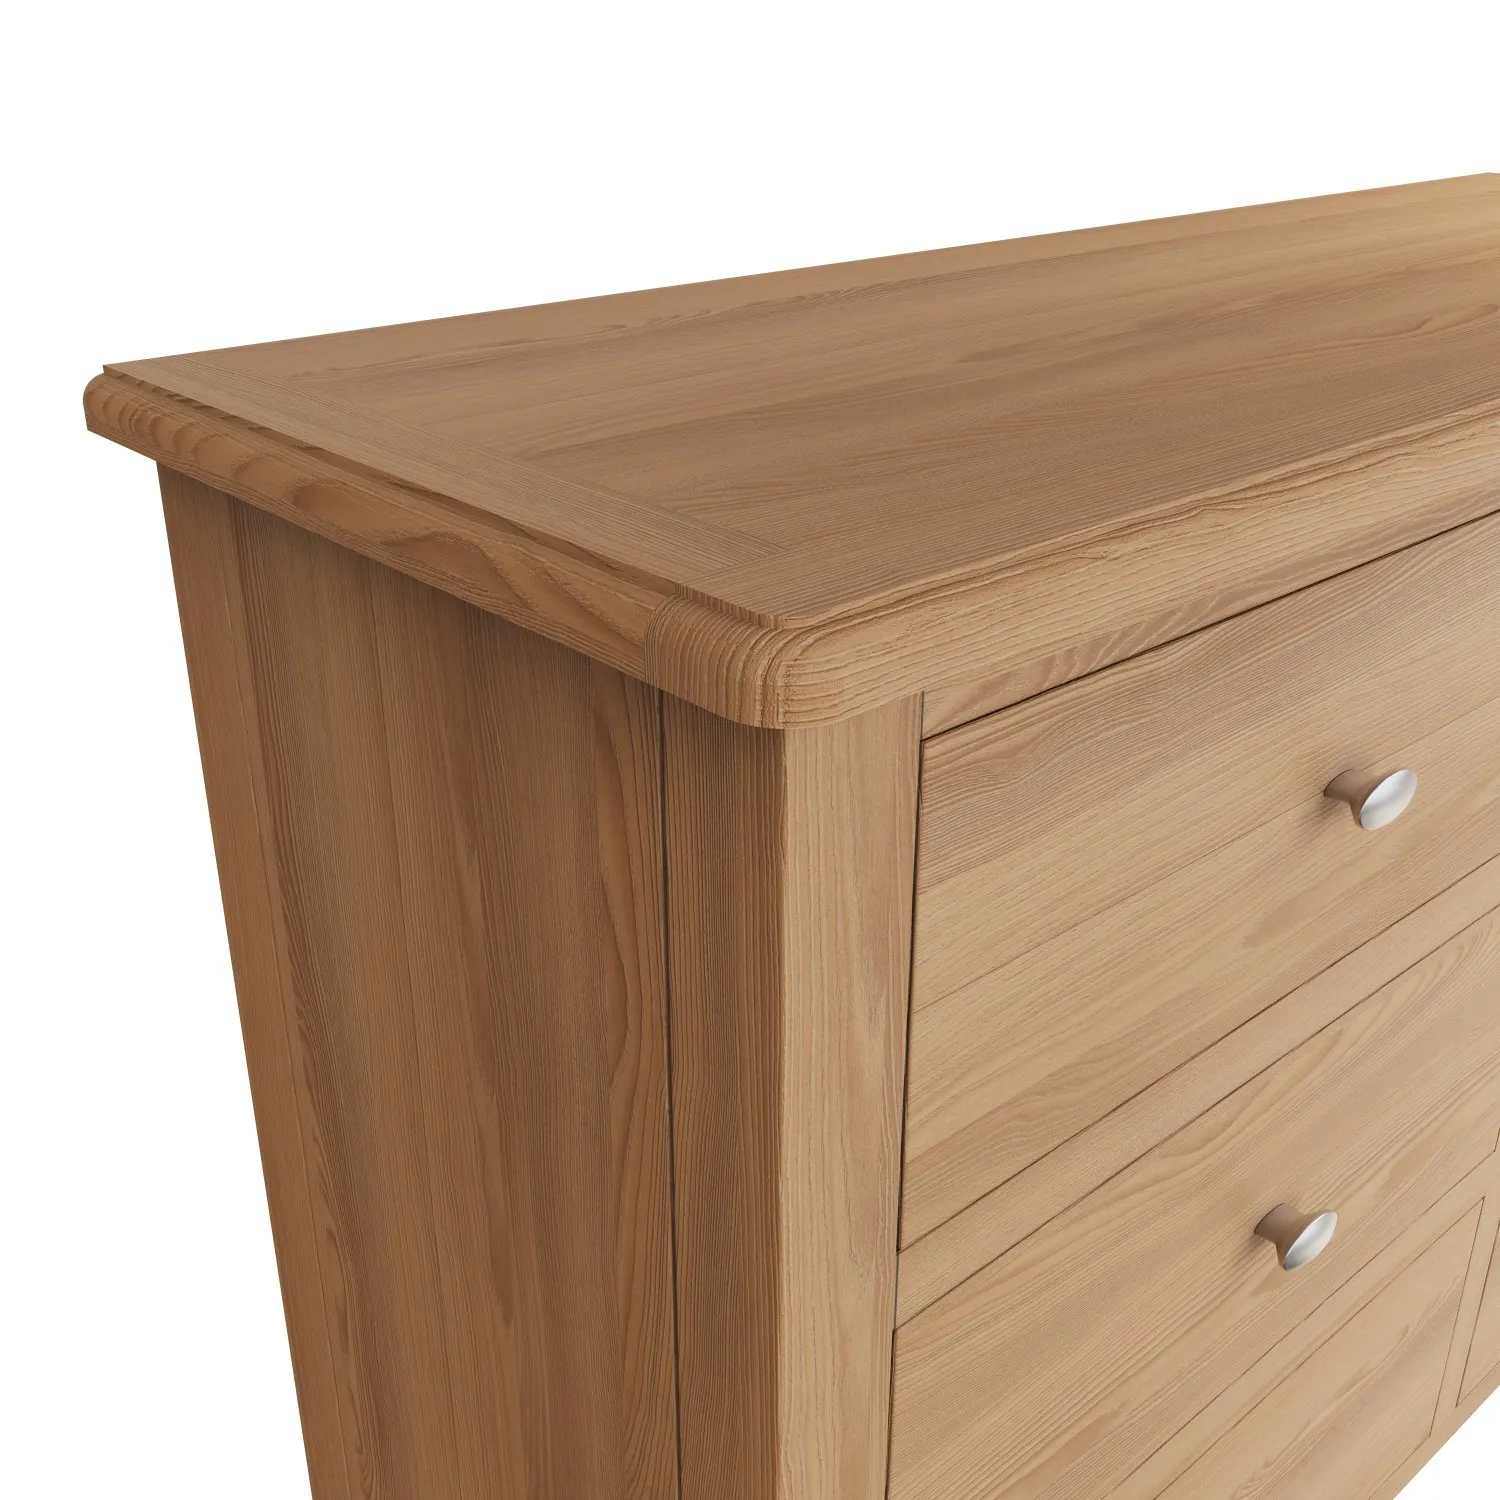 Light Oak 6 Drawer Chest with Metal Knobs